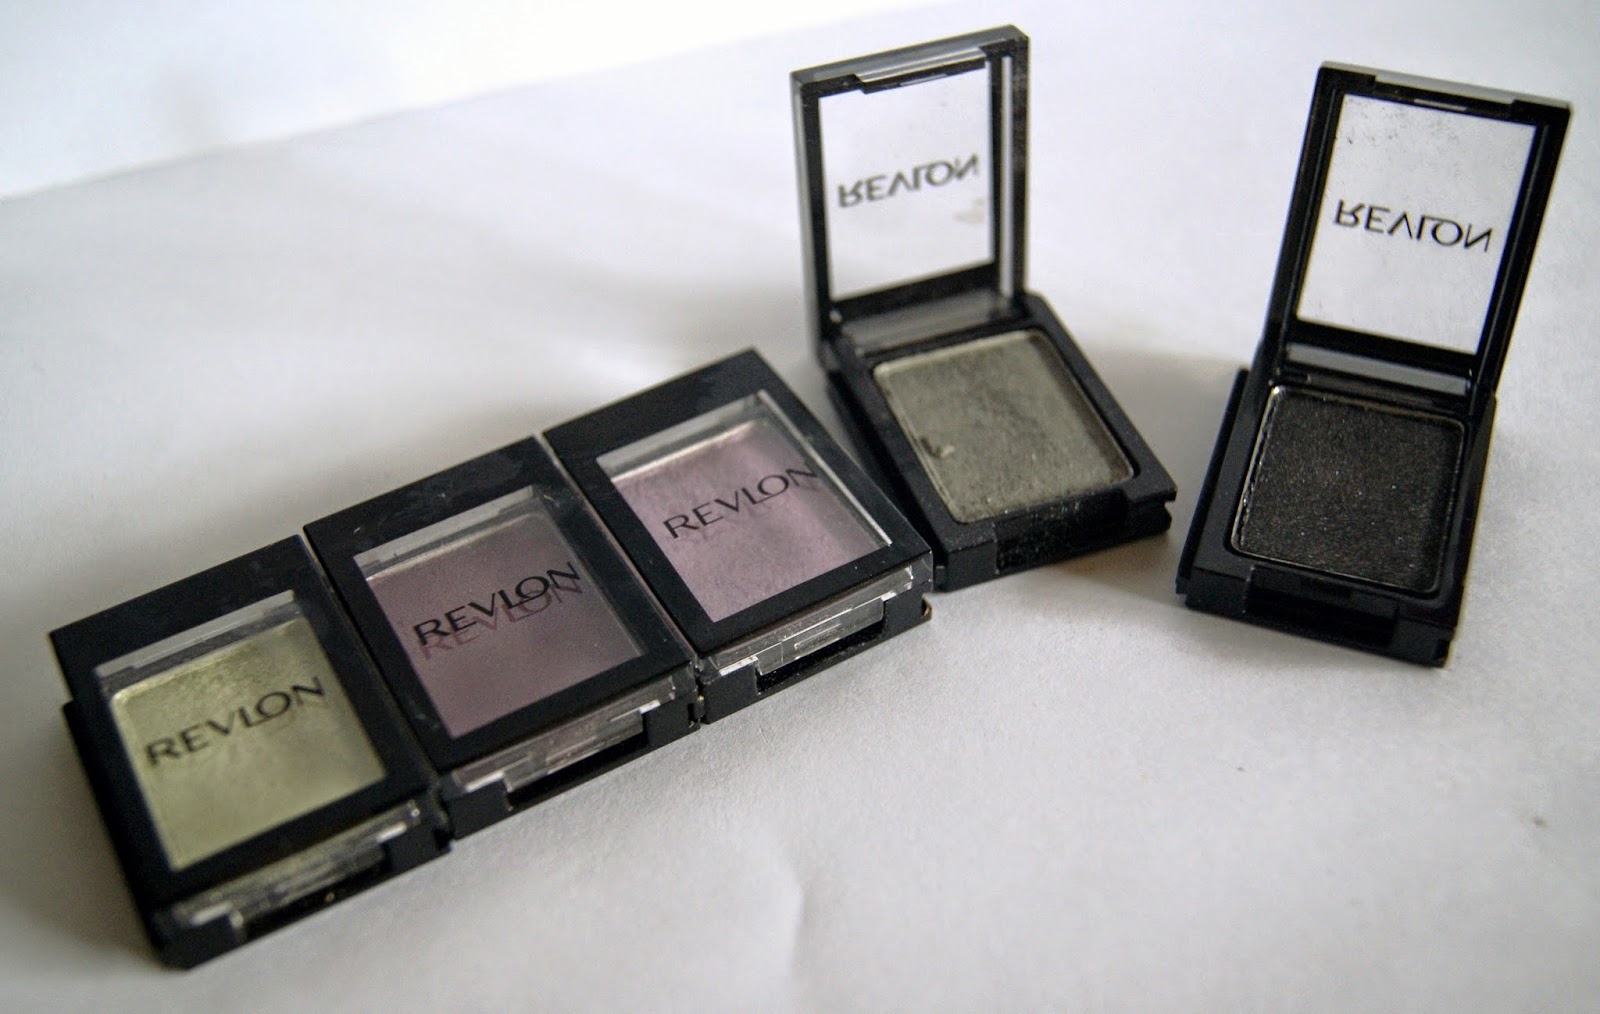 Revlon Colorstay Shadowlinks Eyeshadow in Lime, Plum, Lilac, Moss, and Onyx, Beauty, Makeup, Review, Melanie_Ps,The Purple Scarf, Toronto